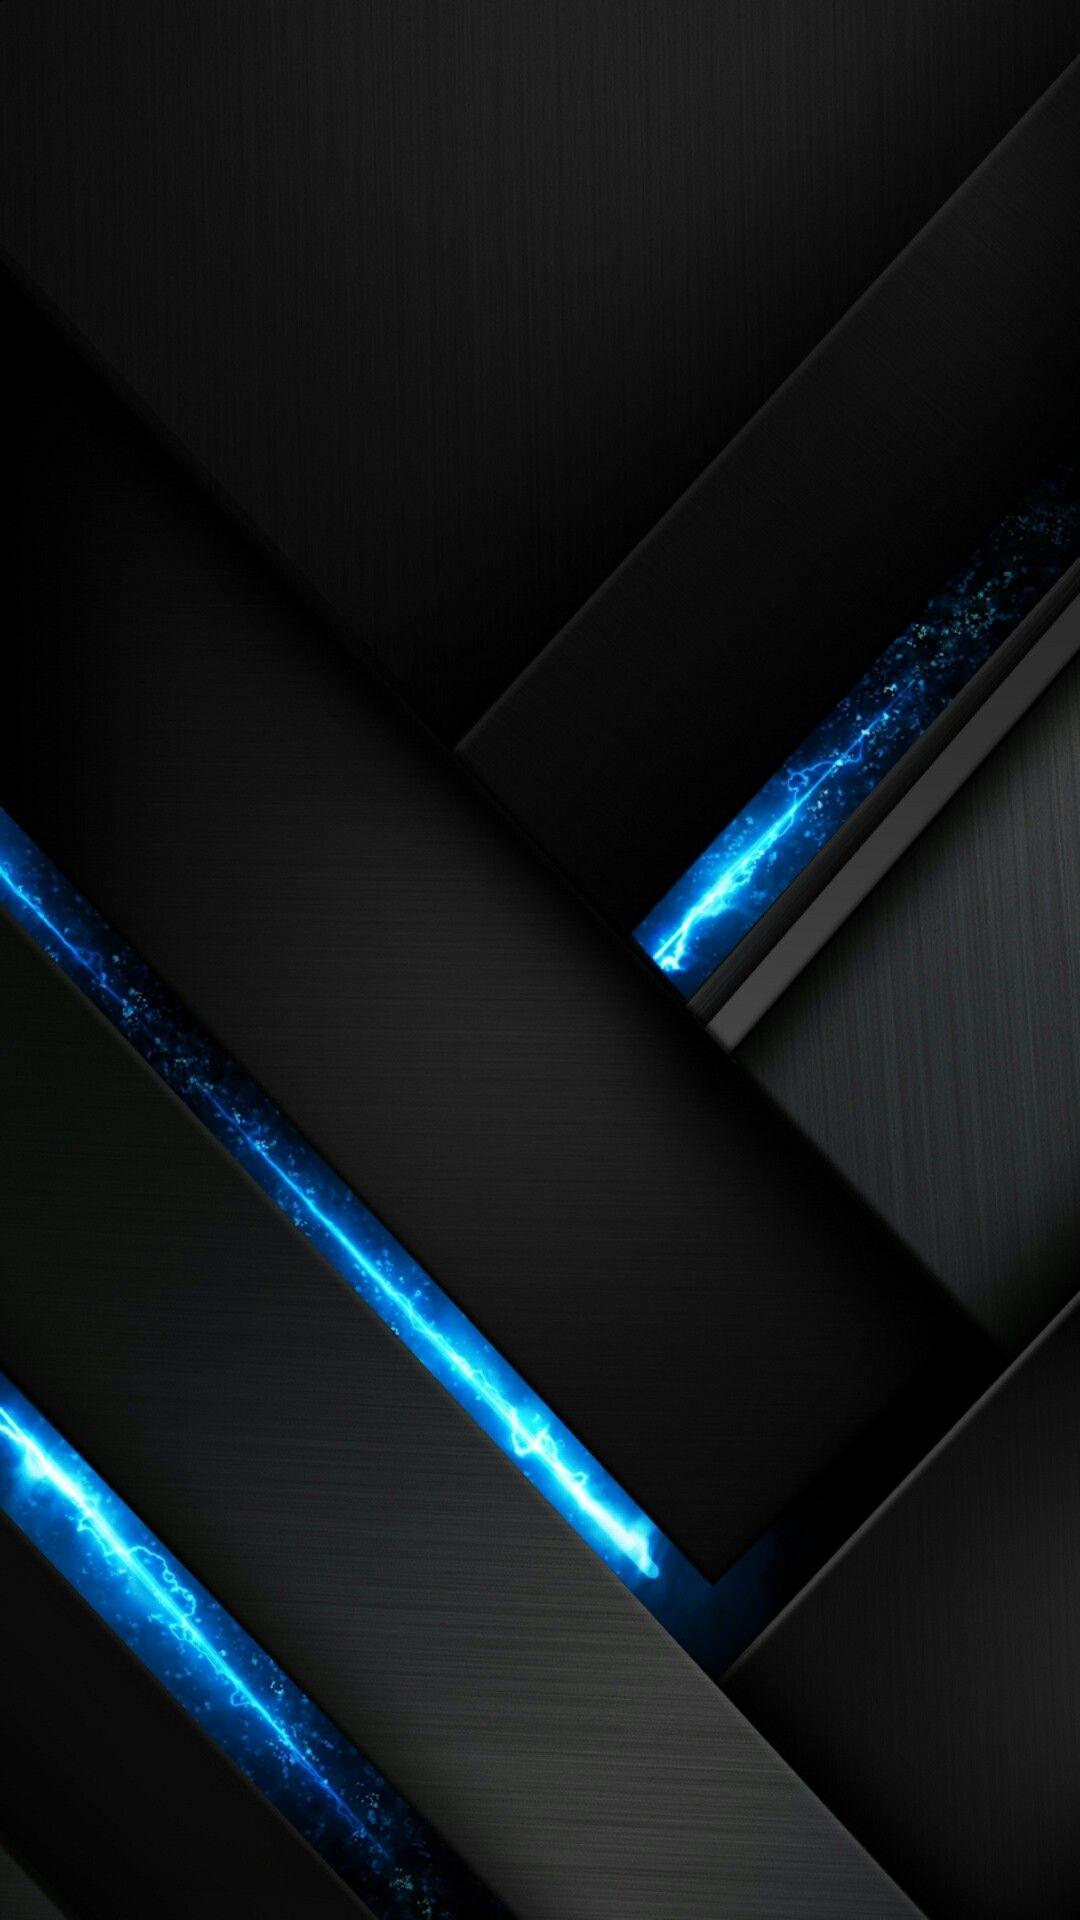 Black and Blue Abstract Wallpaper. Black and blue wallpaper, Black HD wallpaper, Abstract wallpaper background